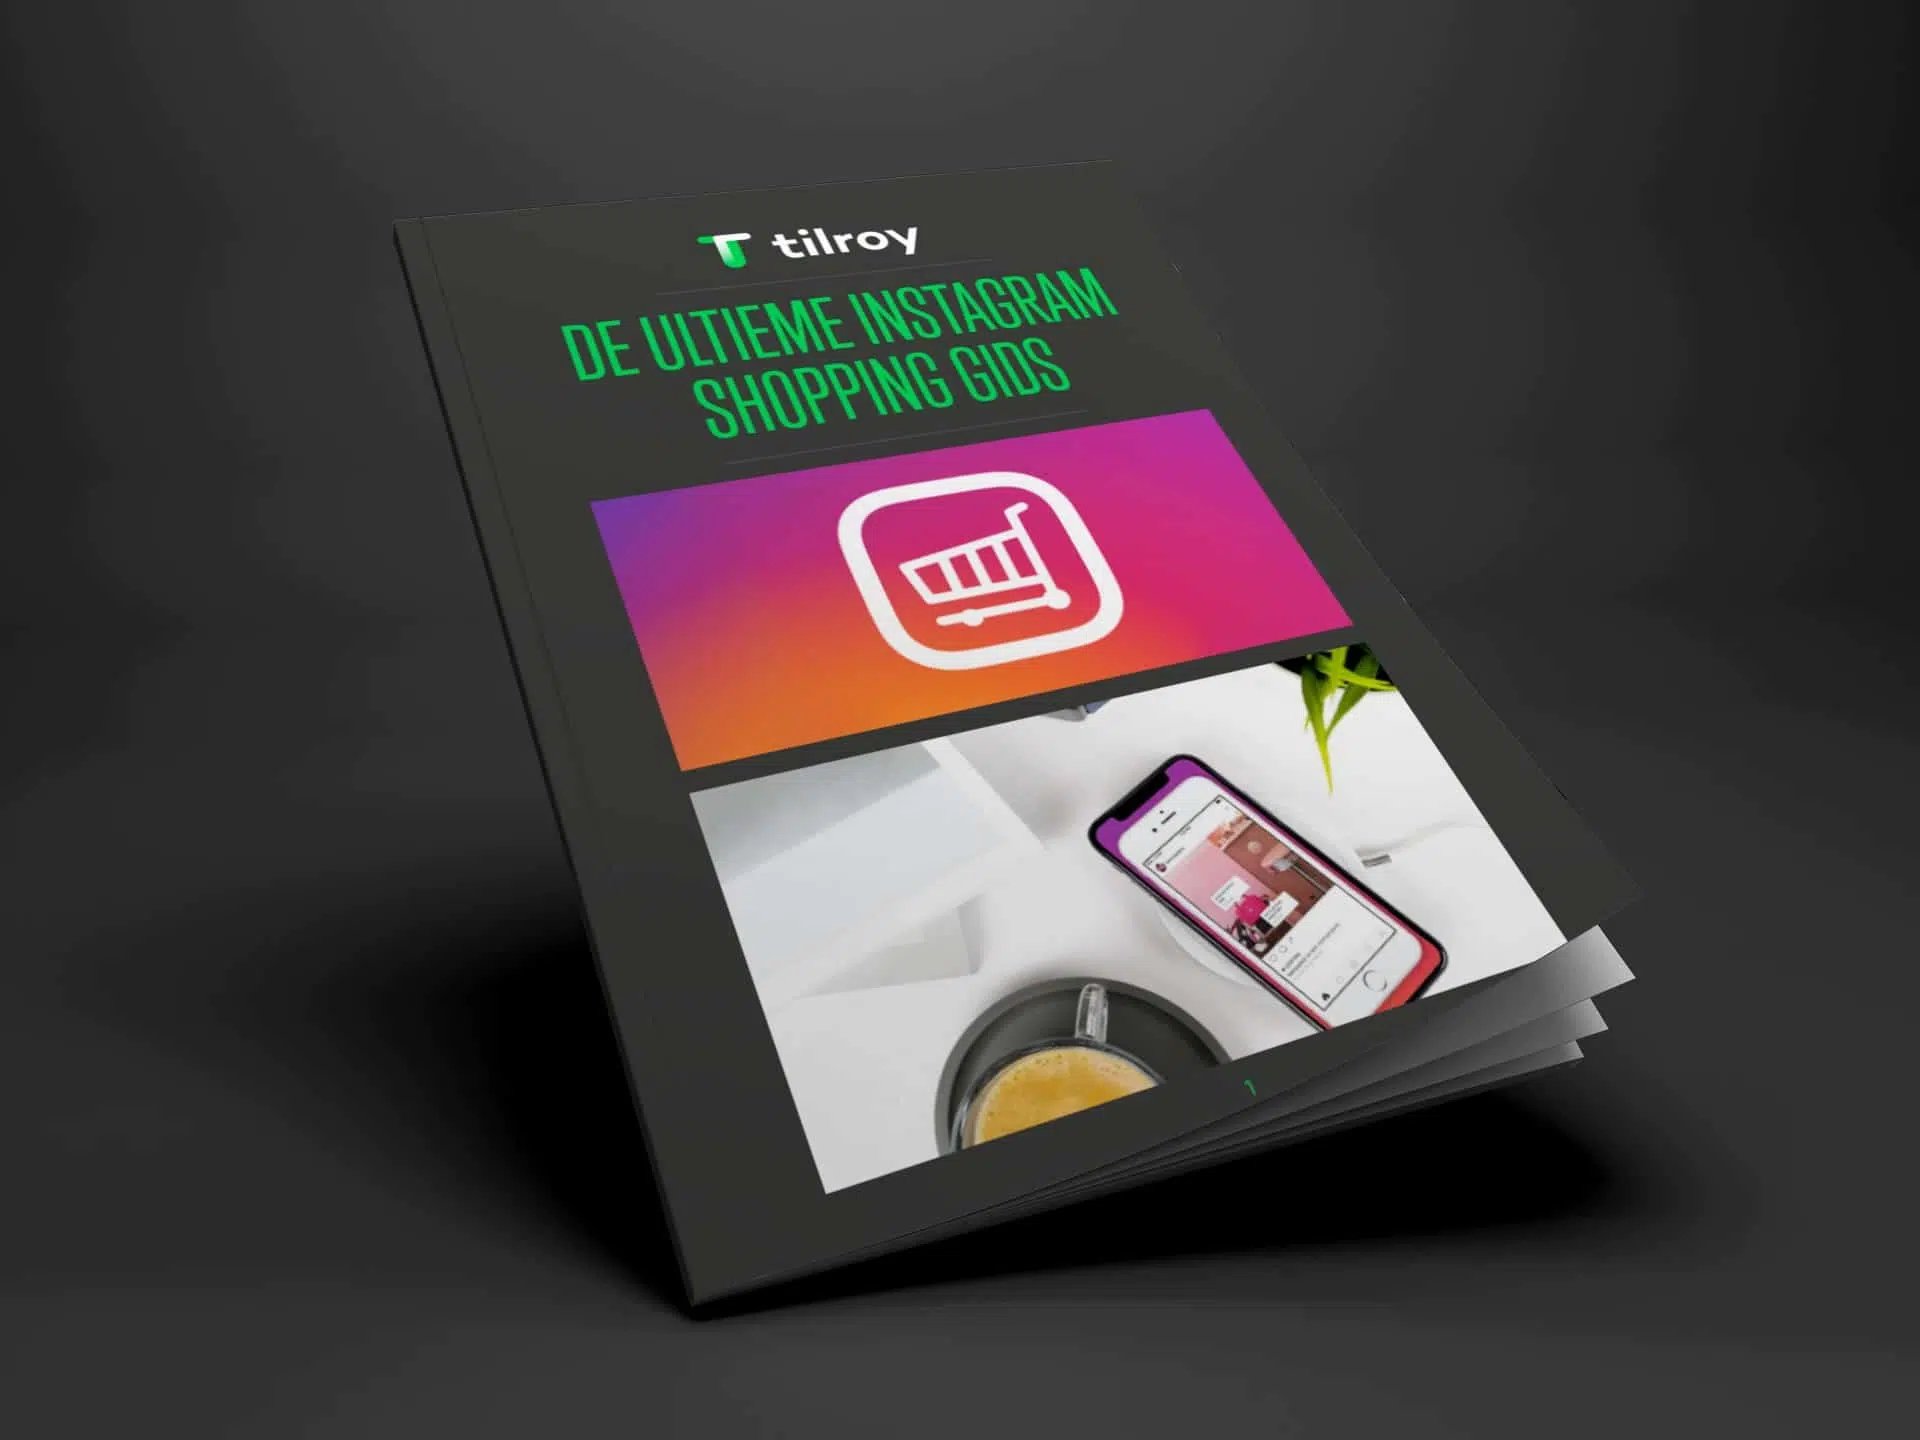 instagram-shopping-gids-cover-voor-mailing-footer.jpg